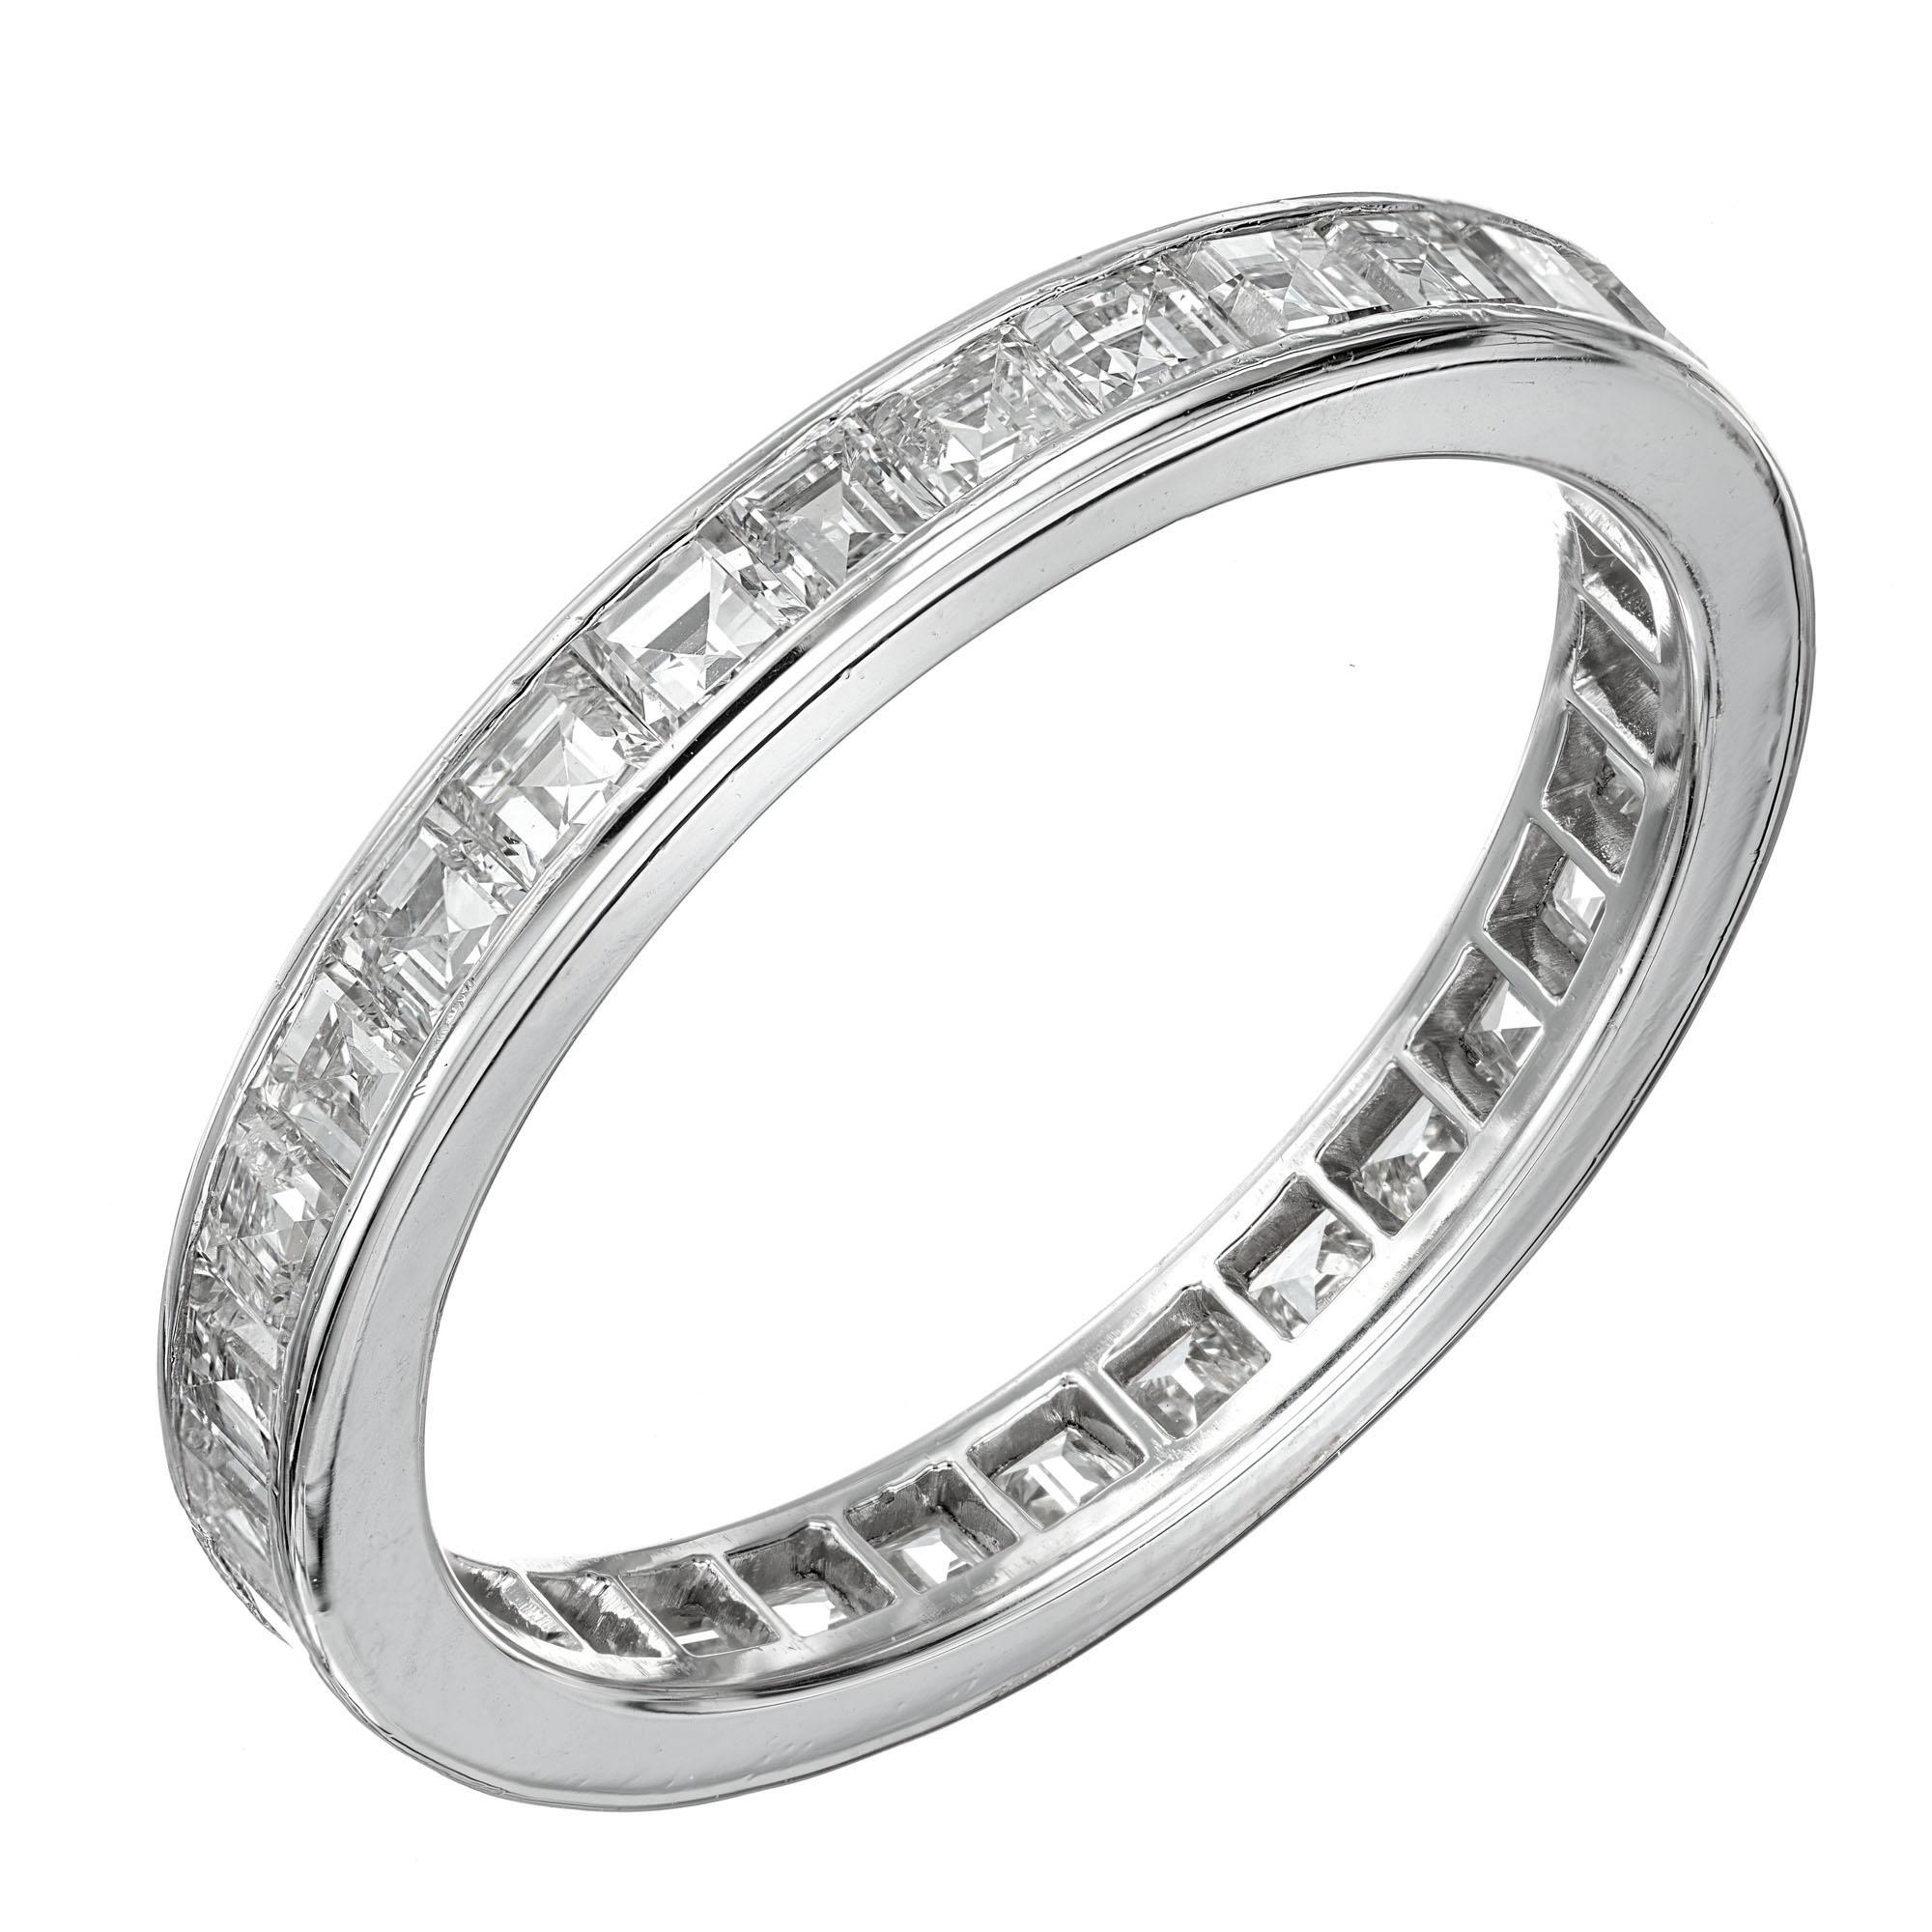 1.50 Carat Diamond Platinum Eternity Band Ring In Excellent Condition For Sale In Stamford, CT